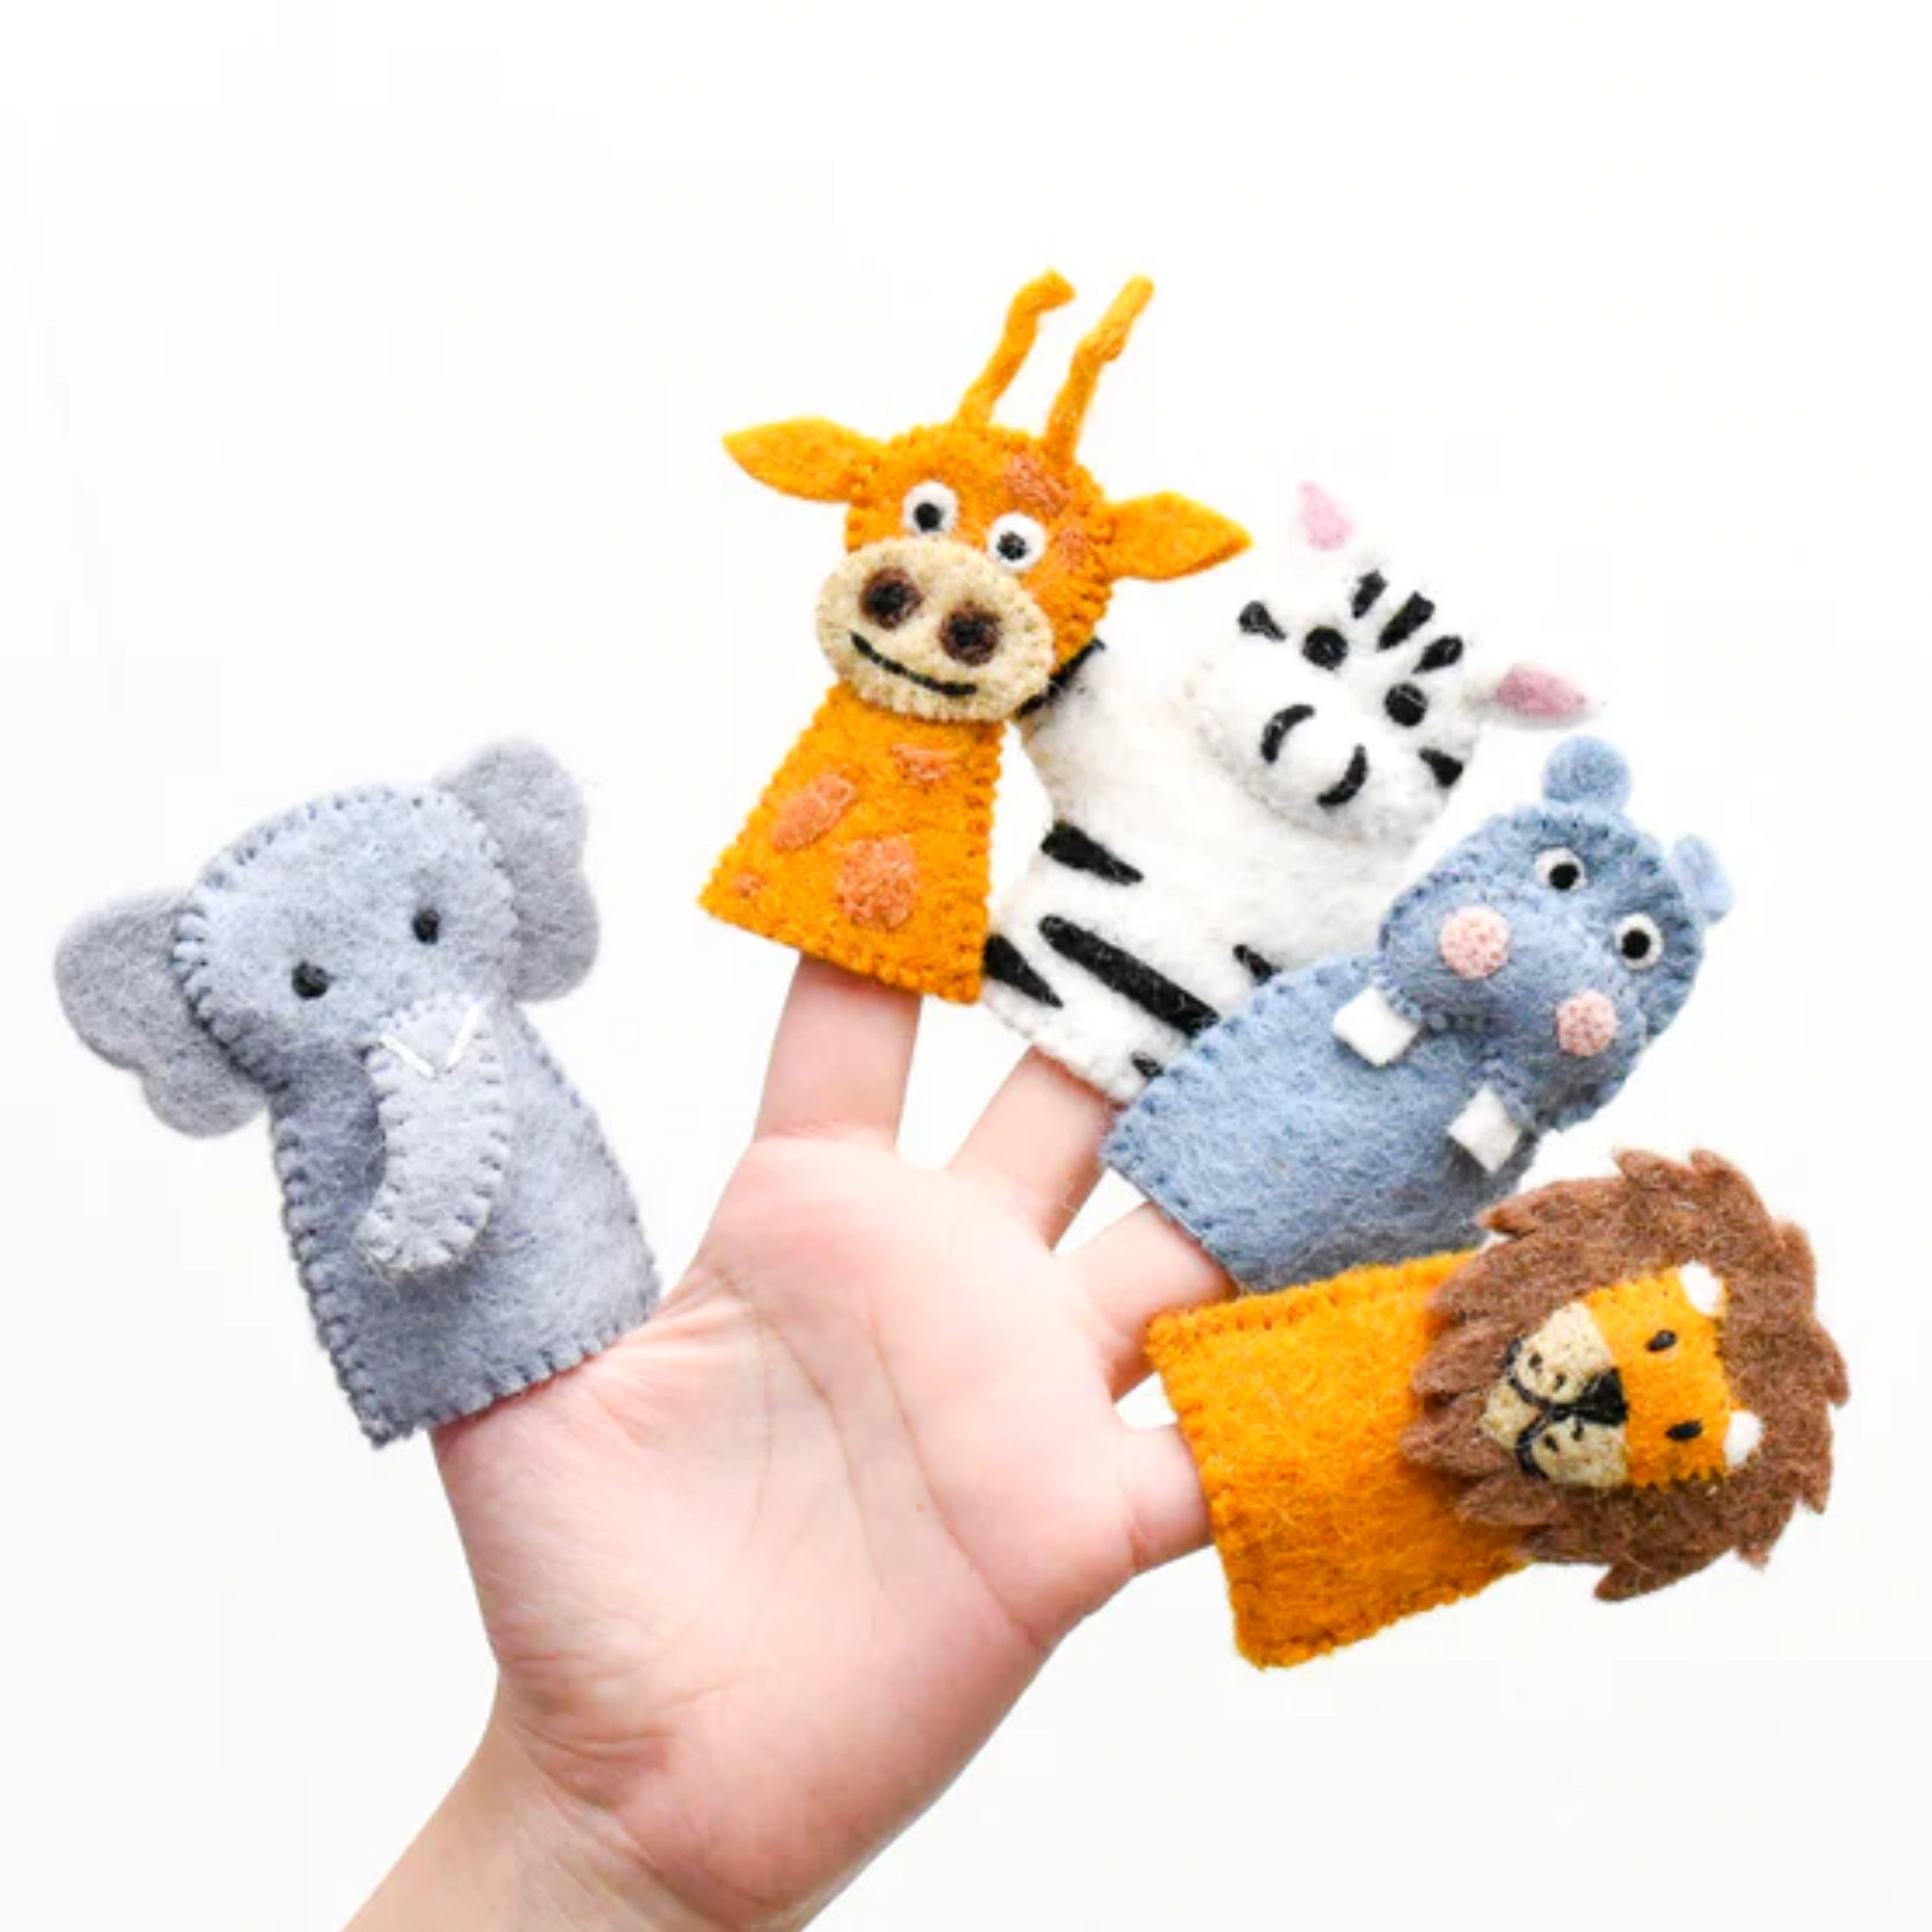 Sustainable Finger Puppets: A Fun and Eco-Friendly Way to Play